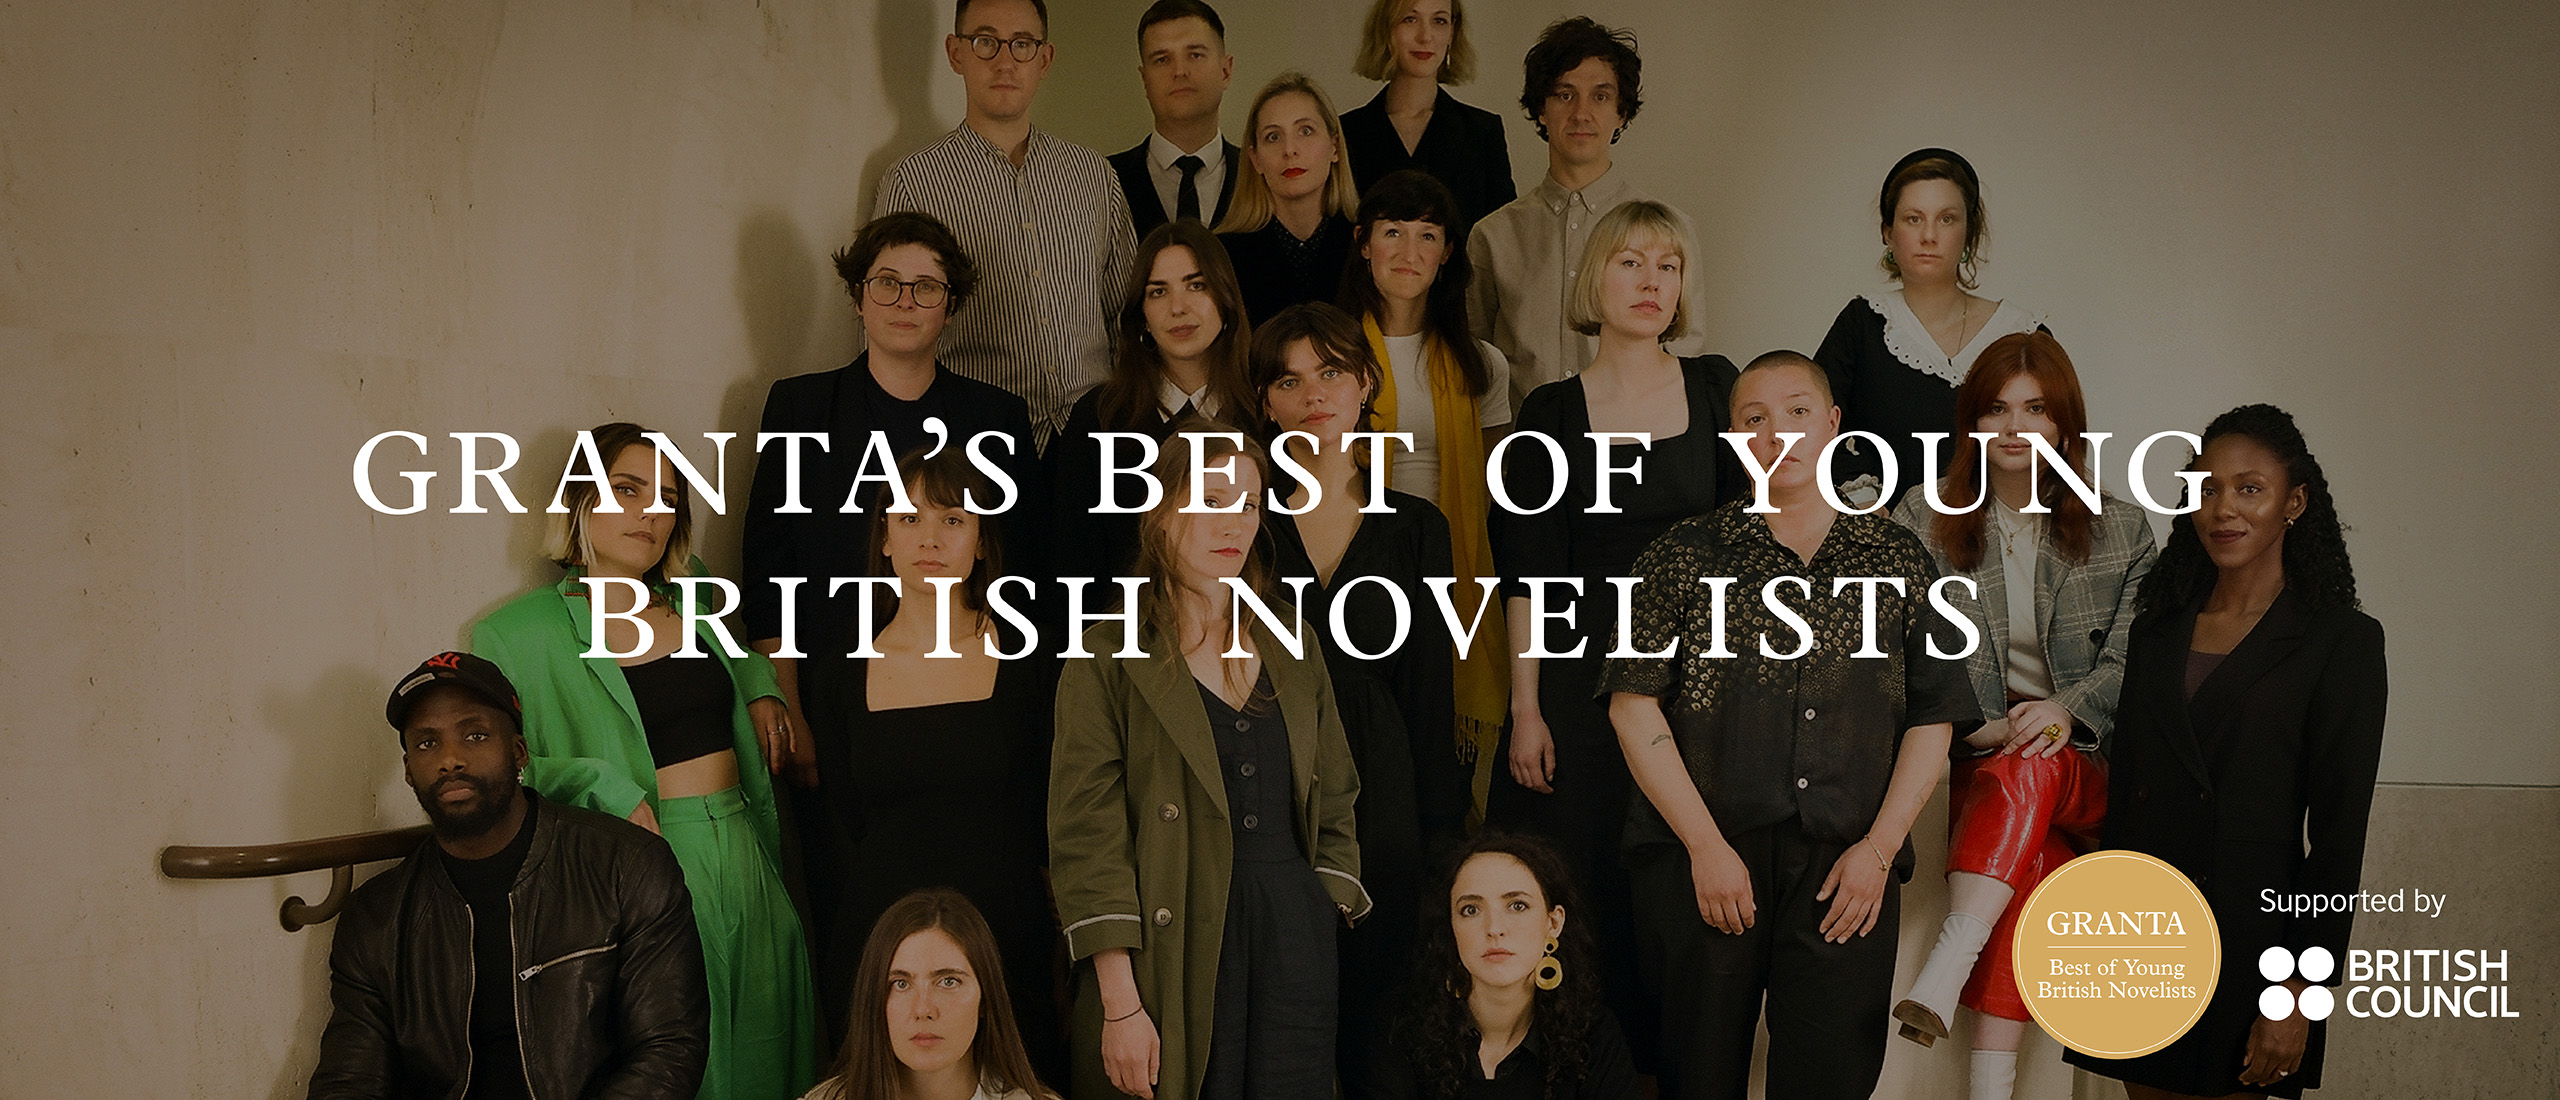 Granta’s twenty Best of Young novelists gathered together for a group picture